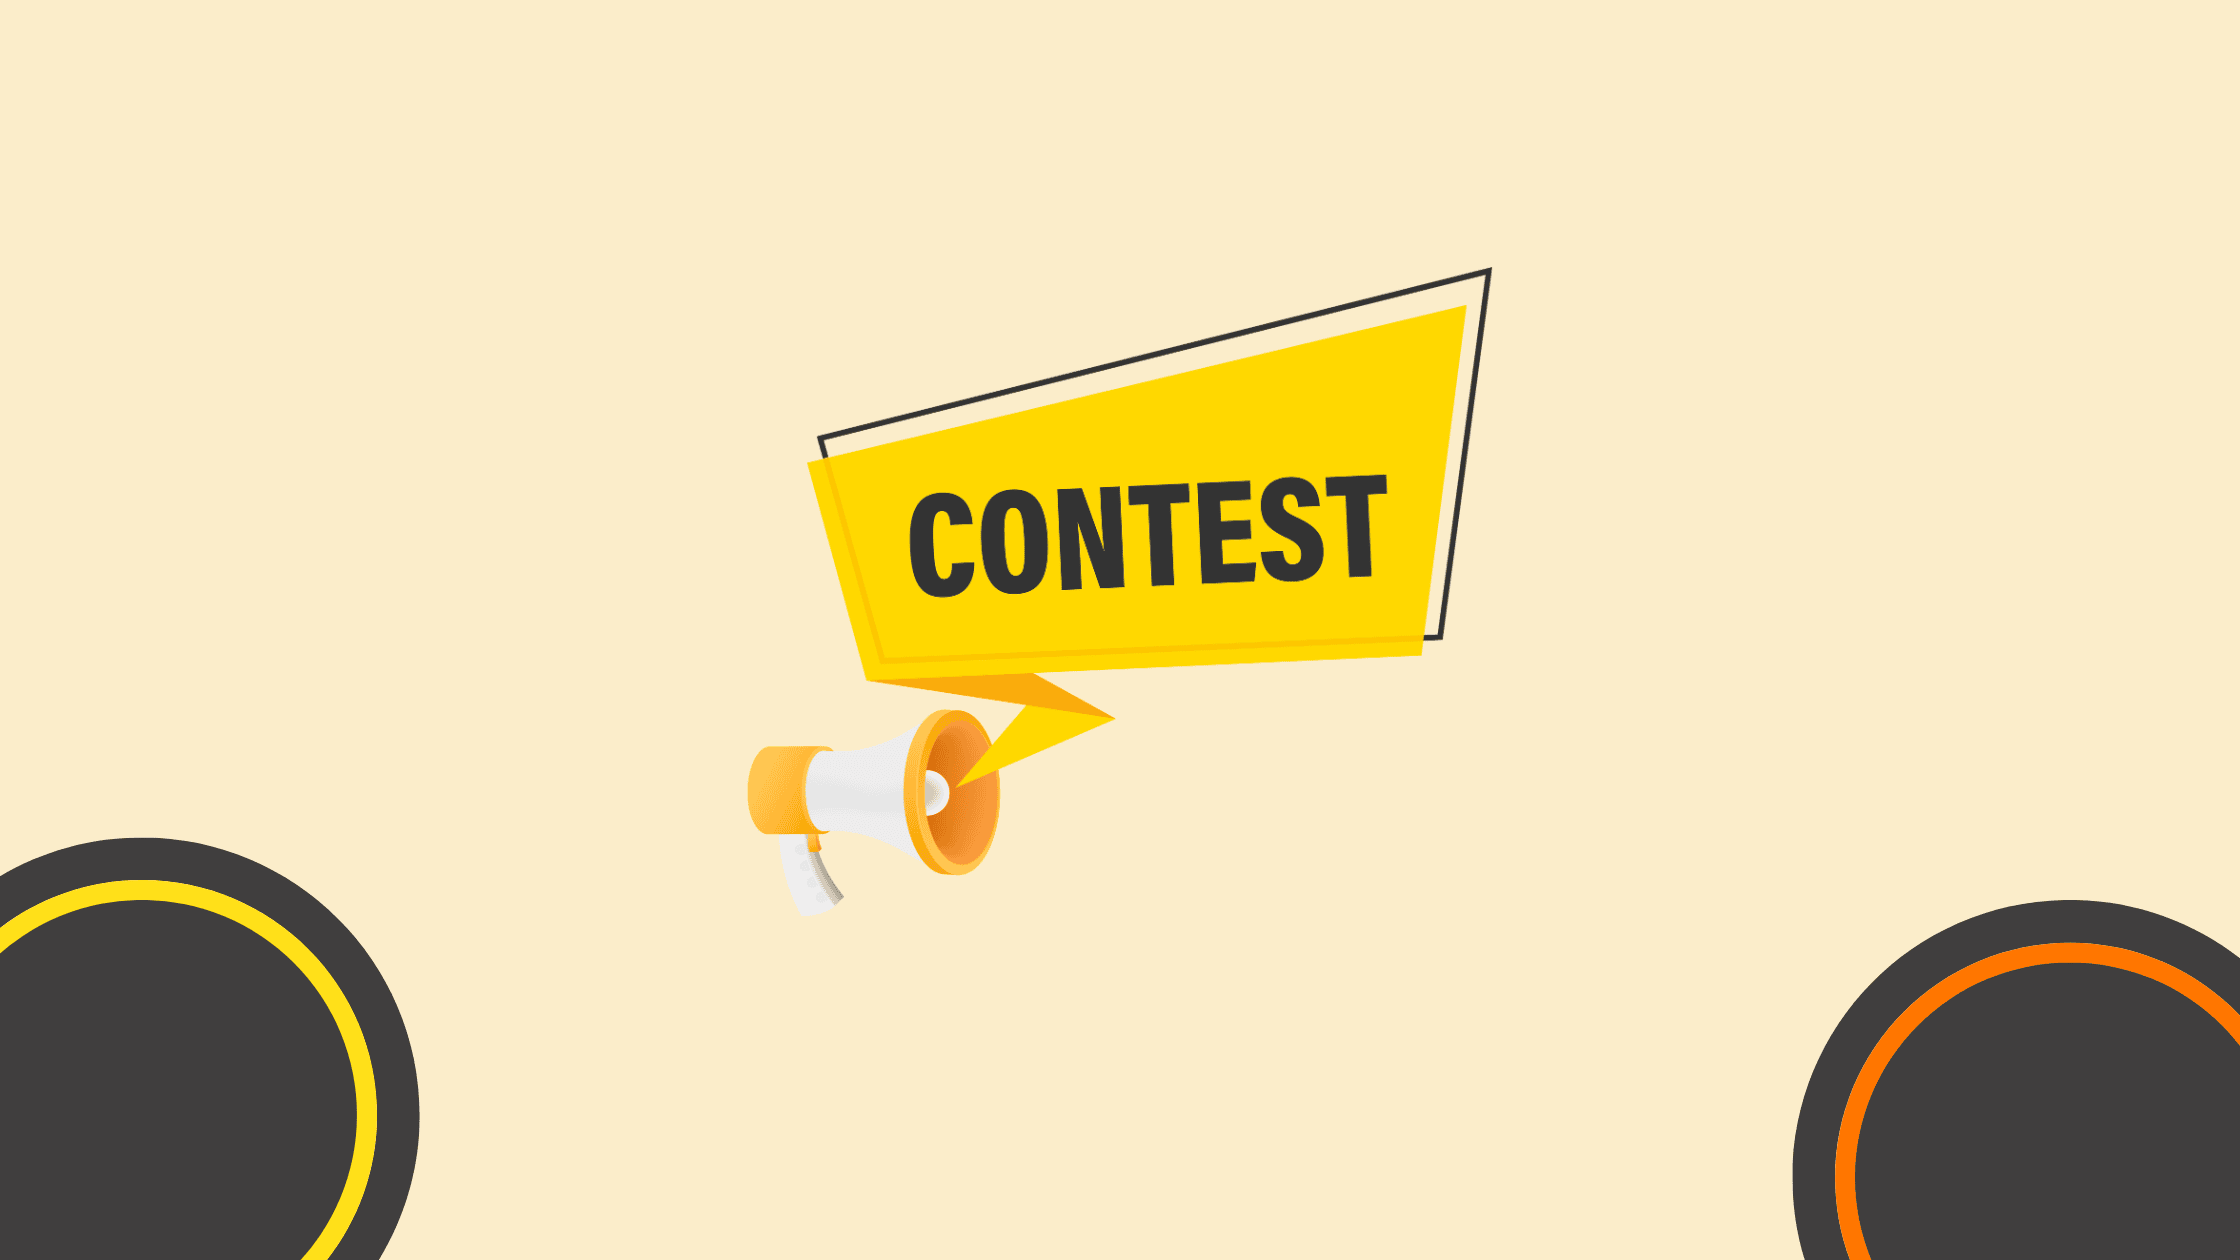 Running contests and giveaways for demand generation